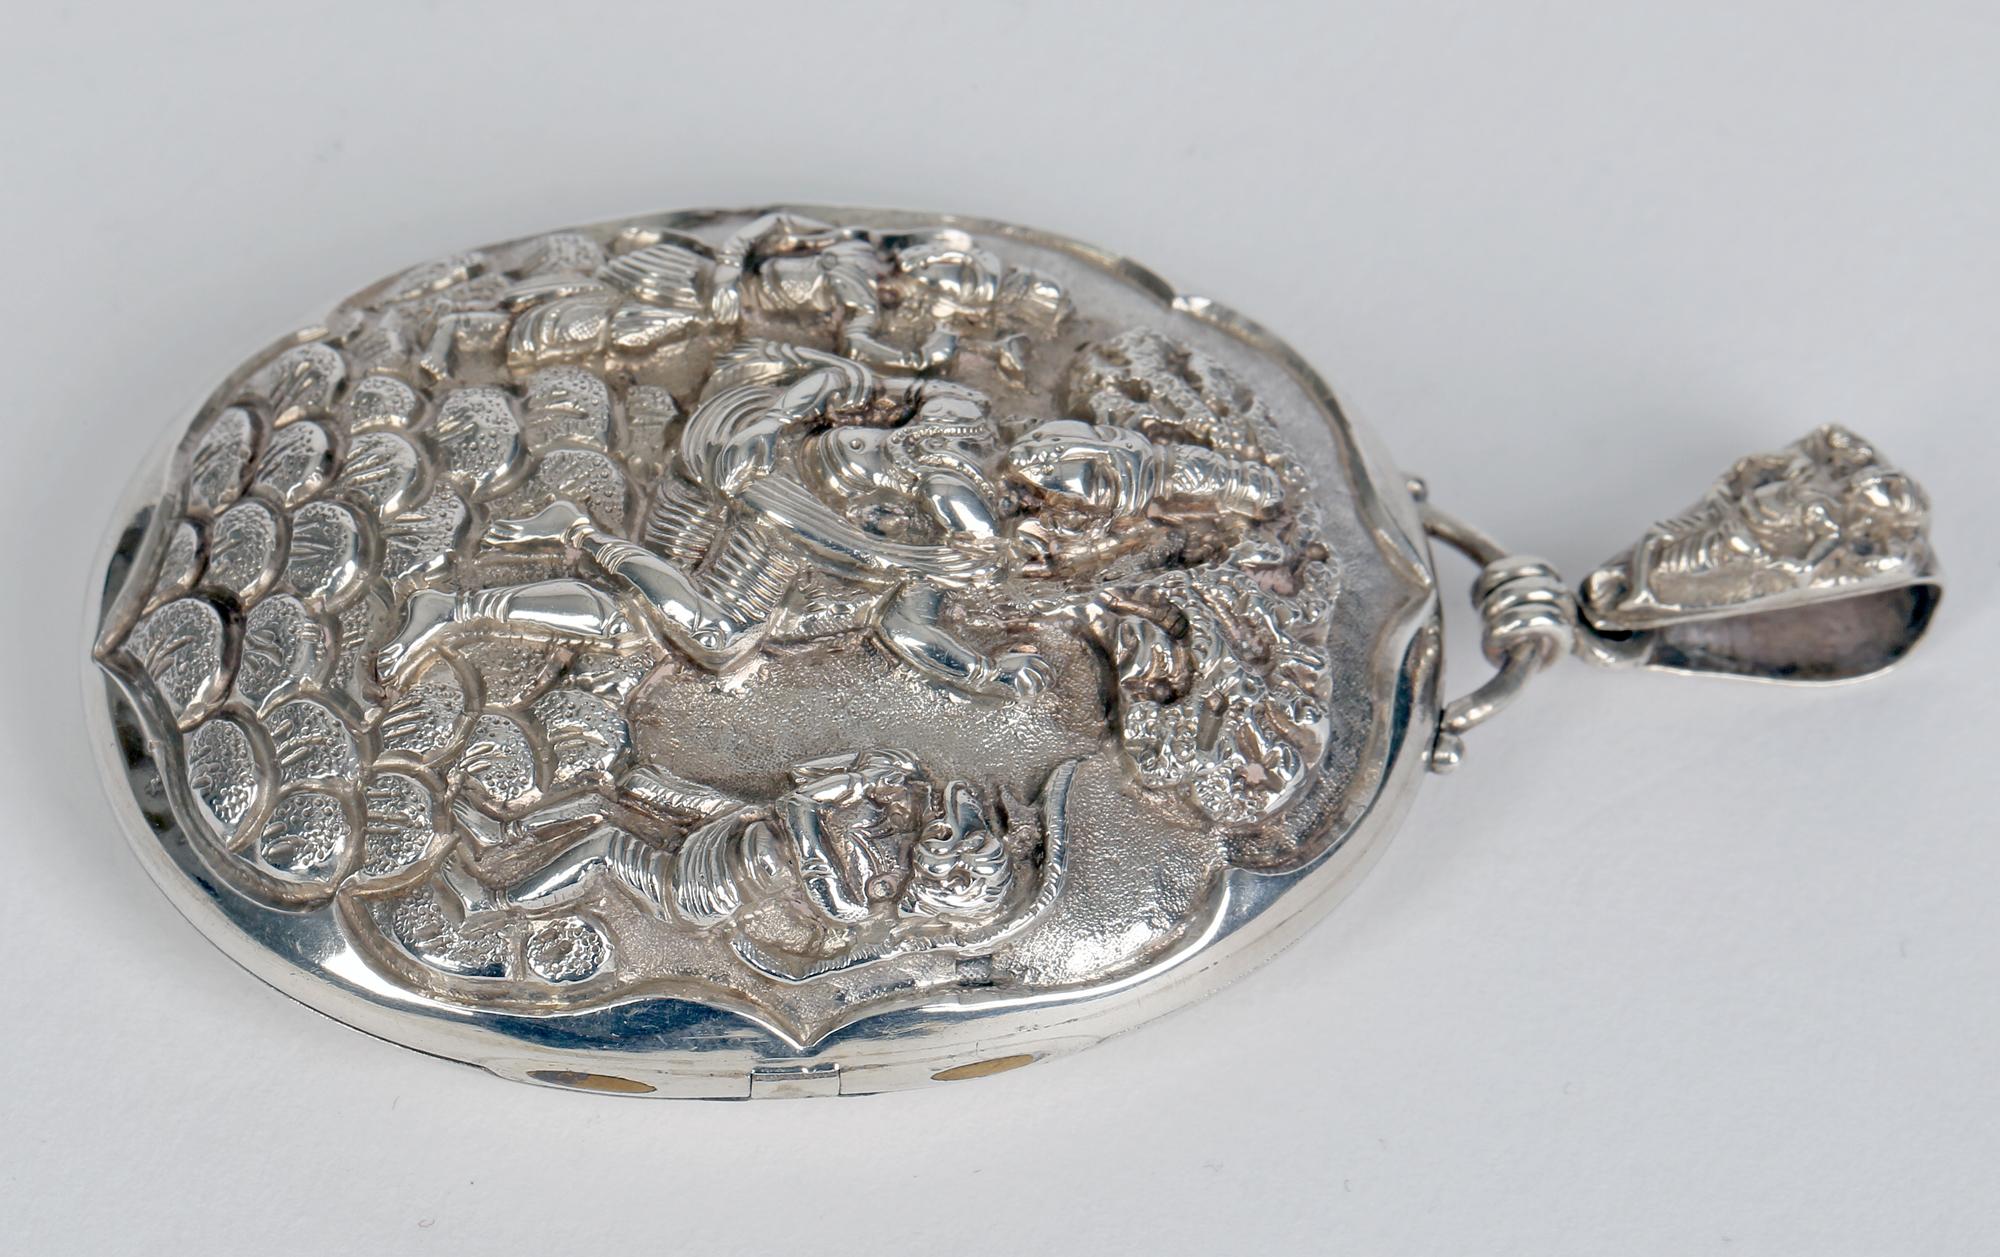 Anglo Indian Fine Large Silver Embossed Deity Oval Locket Dated 1880 For Sale 4